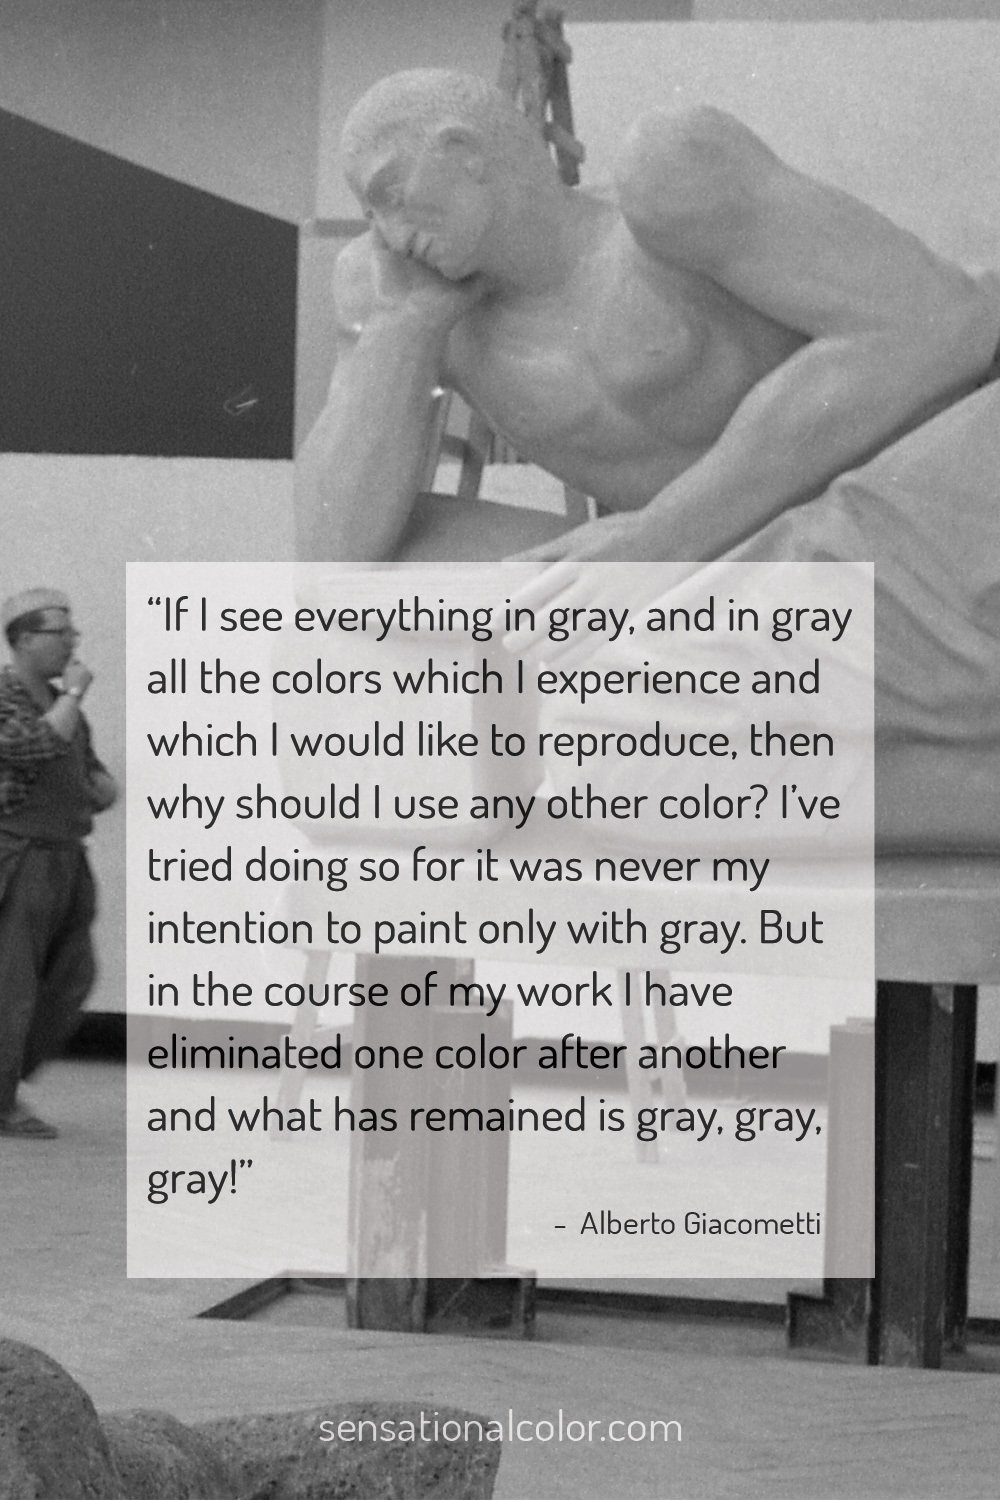 “If I see everything in gray, and in gray all the colors which I experience and which I would like to reproduce, then why should I use any other color? I’ve tried doing so, for it was never my intention to paint only with gray. But in the course of my work I have eliminated one color after another, and what has remained is gray, gray, gray!" - Alberto Giacometti